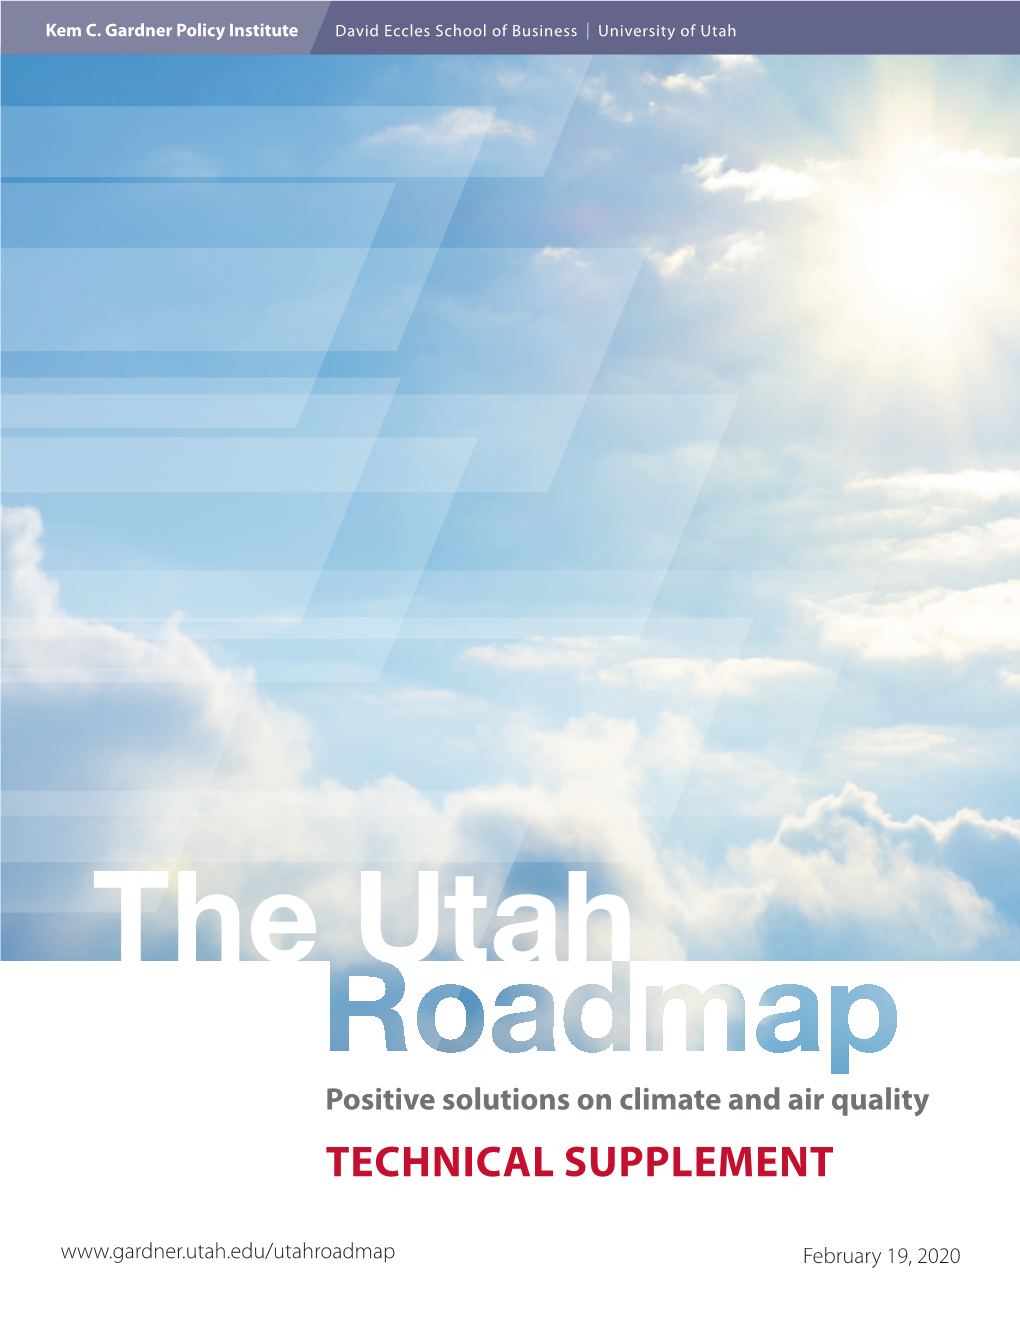 The Utah Roadmap: Positive Solutions on Climate and Air Quality